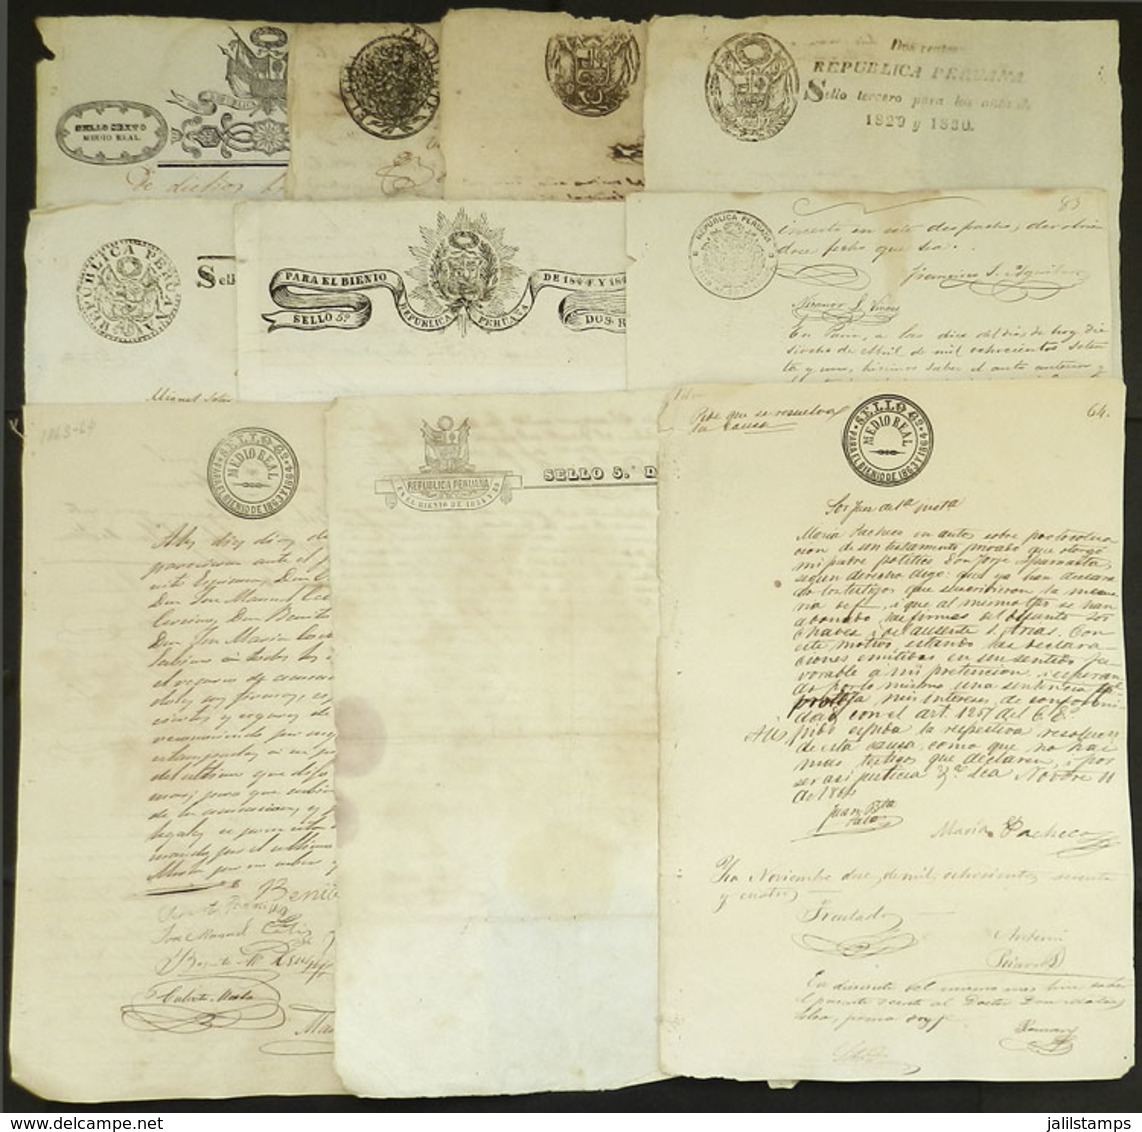 PERU: REVENUE-STAMPED PAPER: Approximately 100 Pages, From 1824 To 1900 (not Consecutive), With Some Duplication But Als - Peru